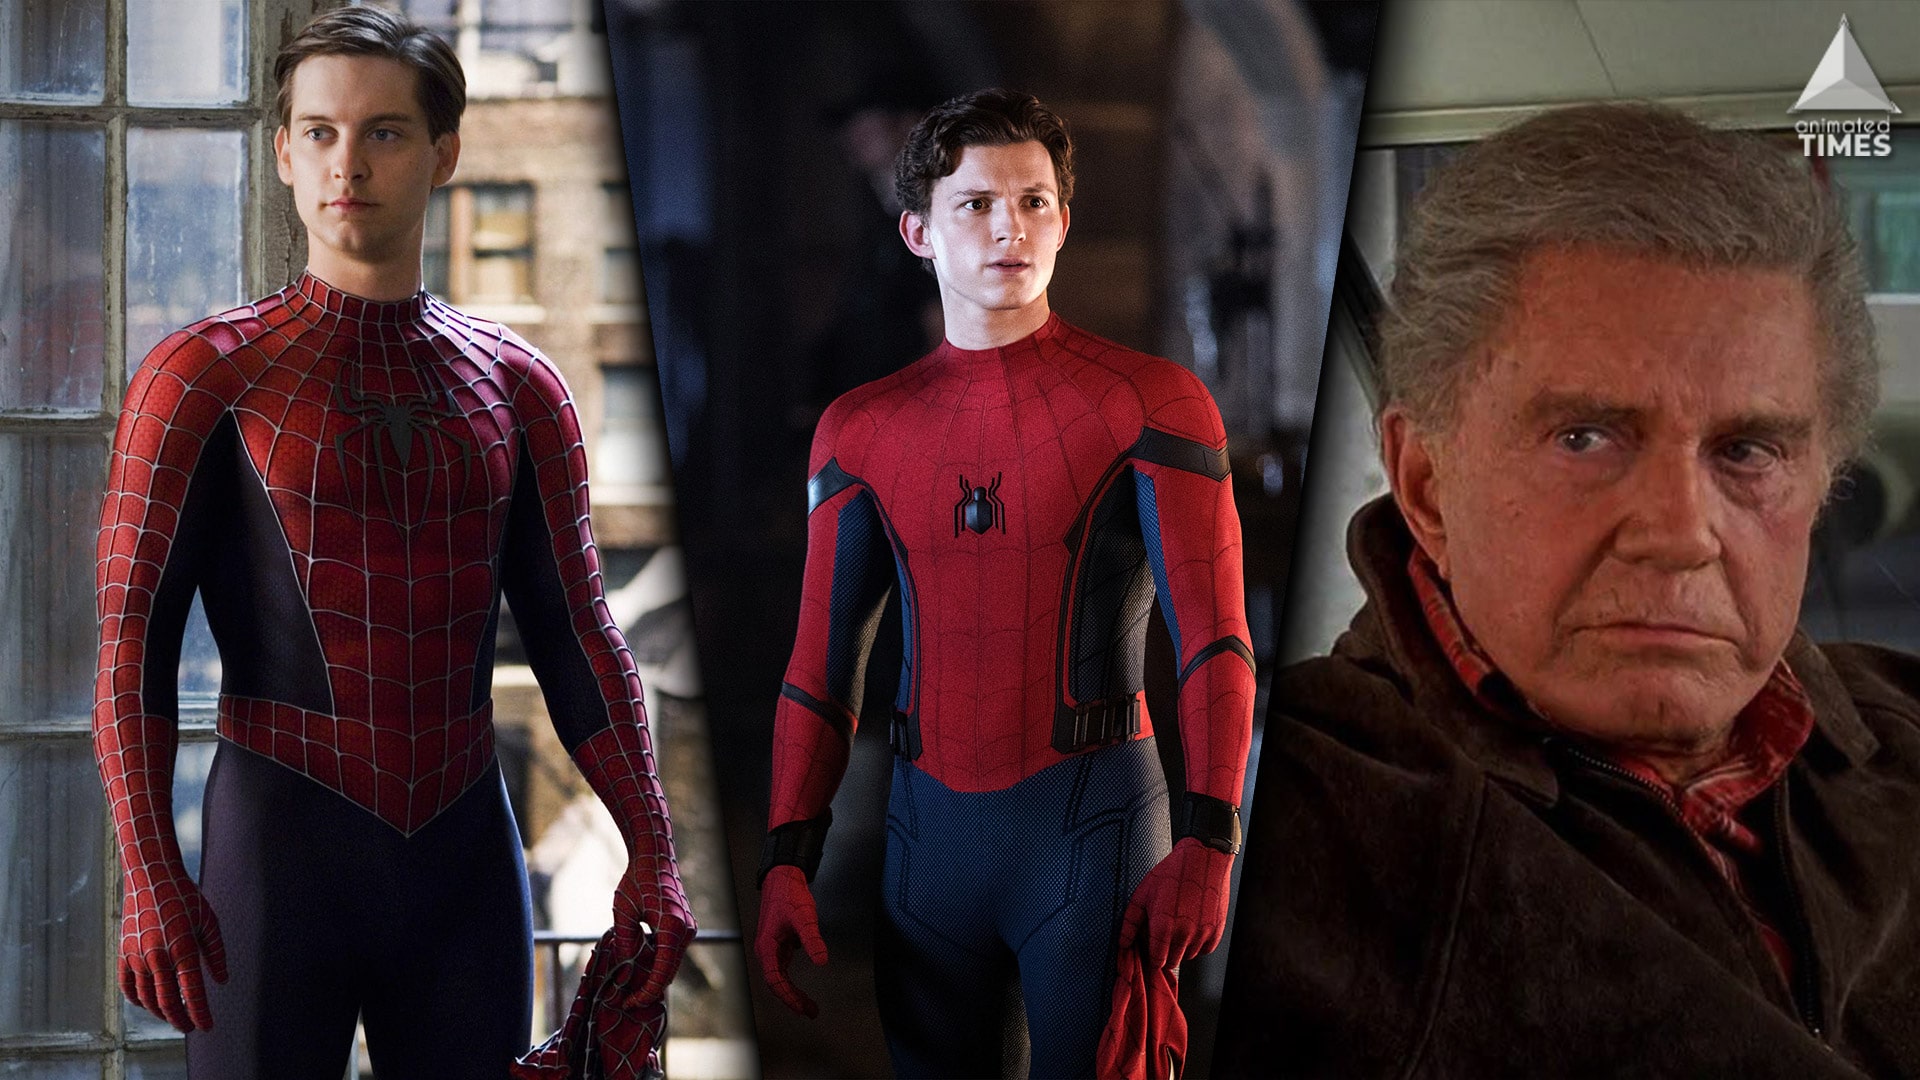 New Theory: Tobey Maguire Playing Uncle Ben in Spider-Man 3